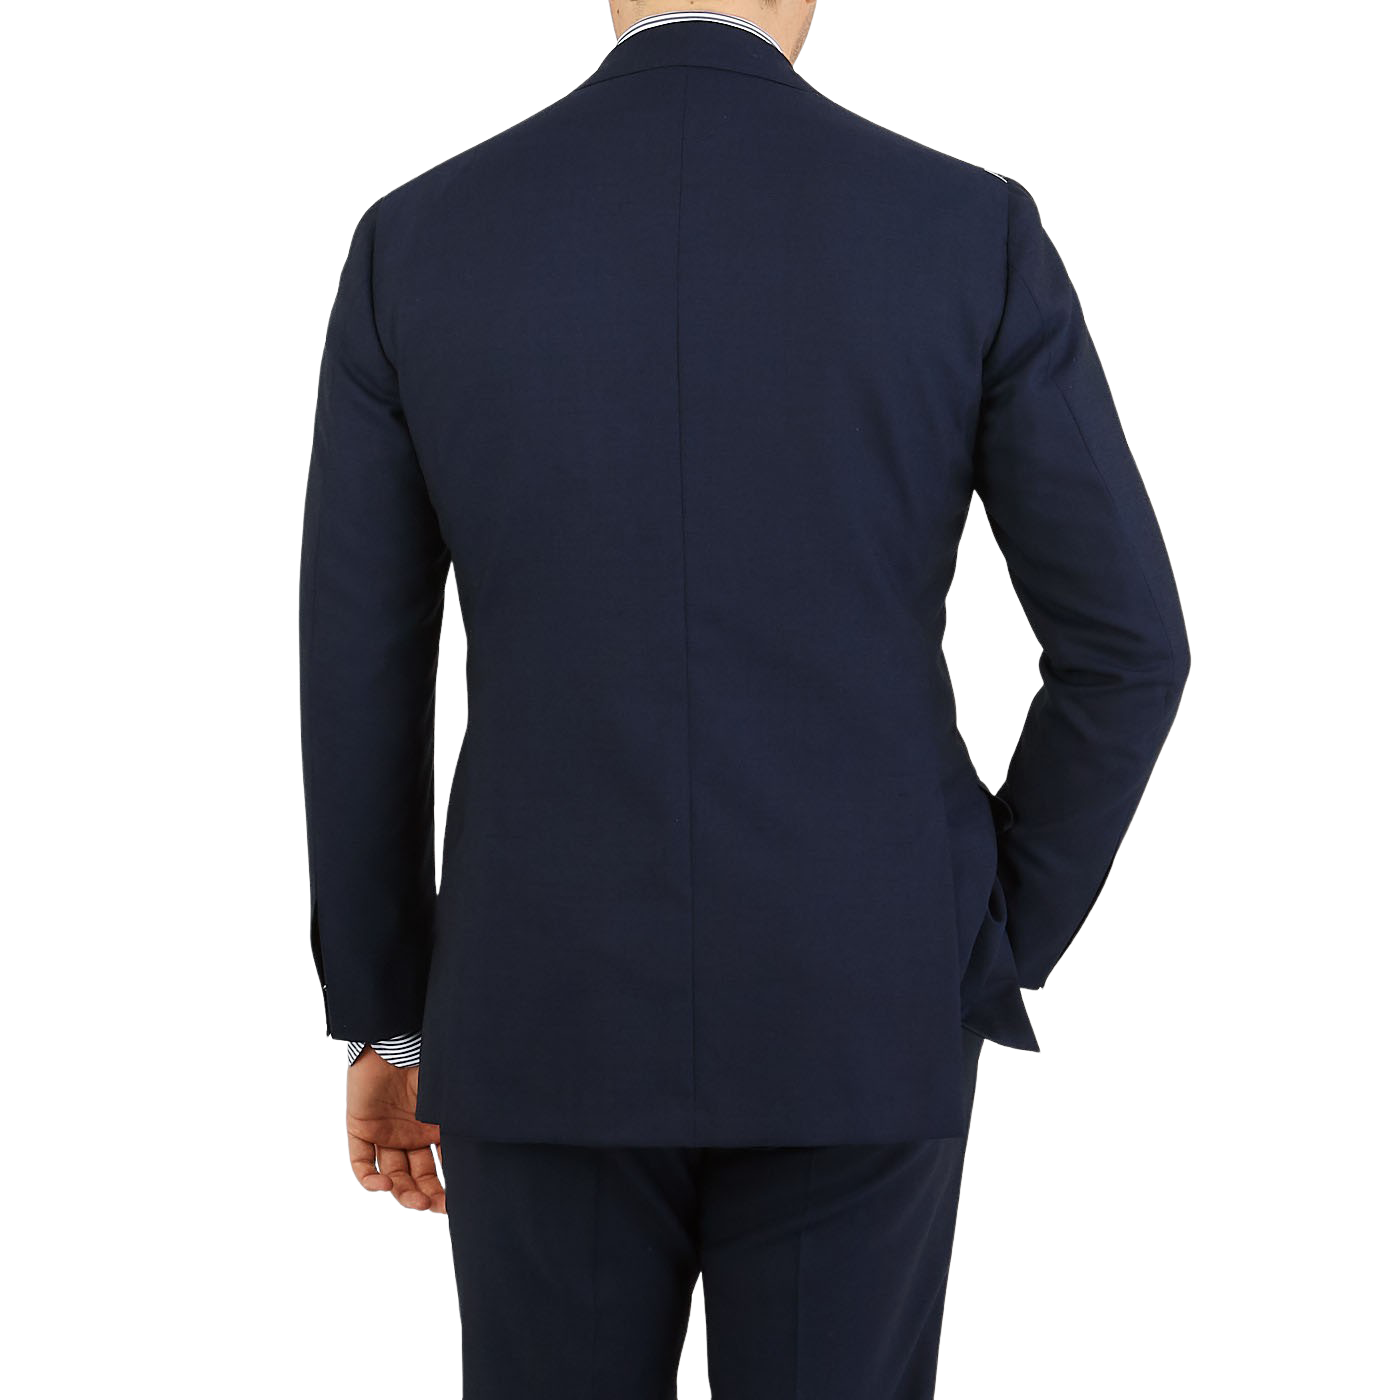 Can a tailor make the back of a suit jacket smaller? - Quora